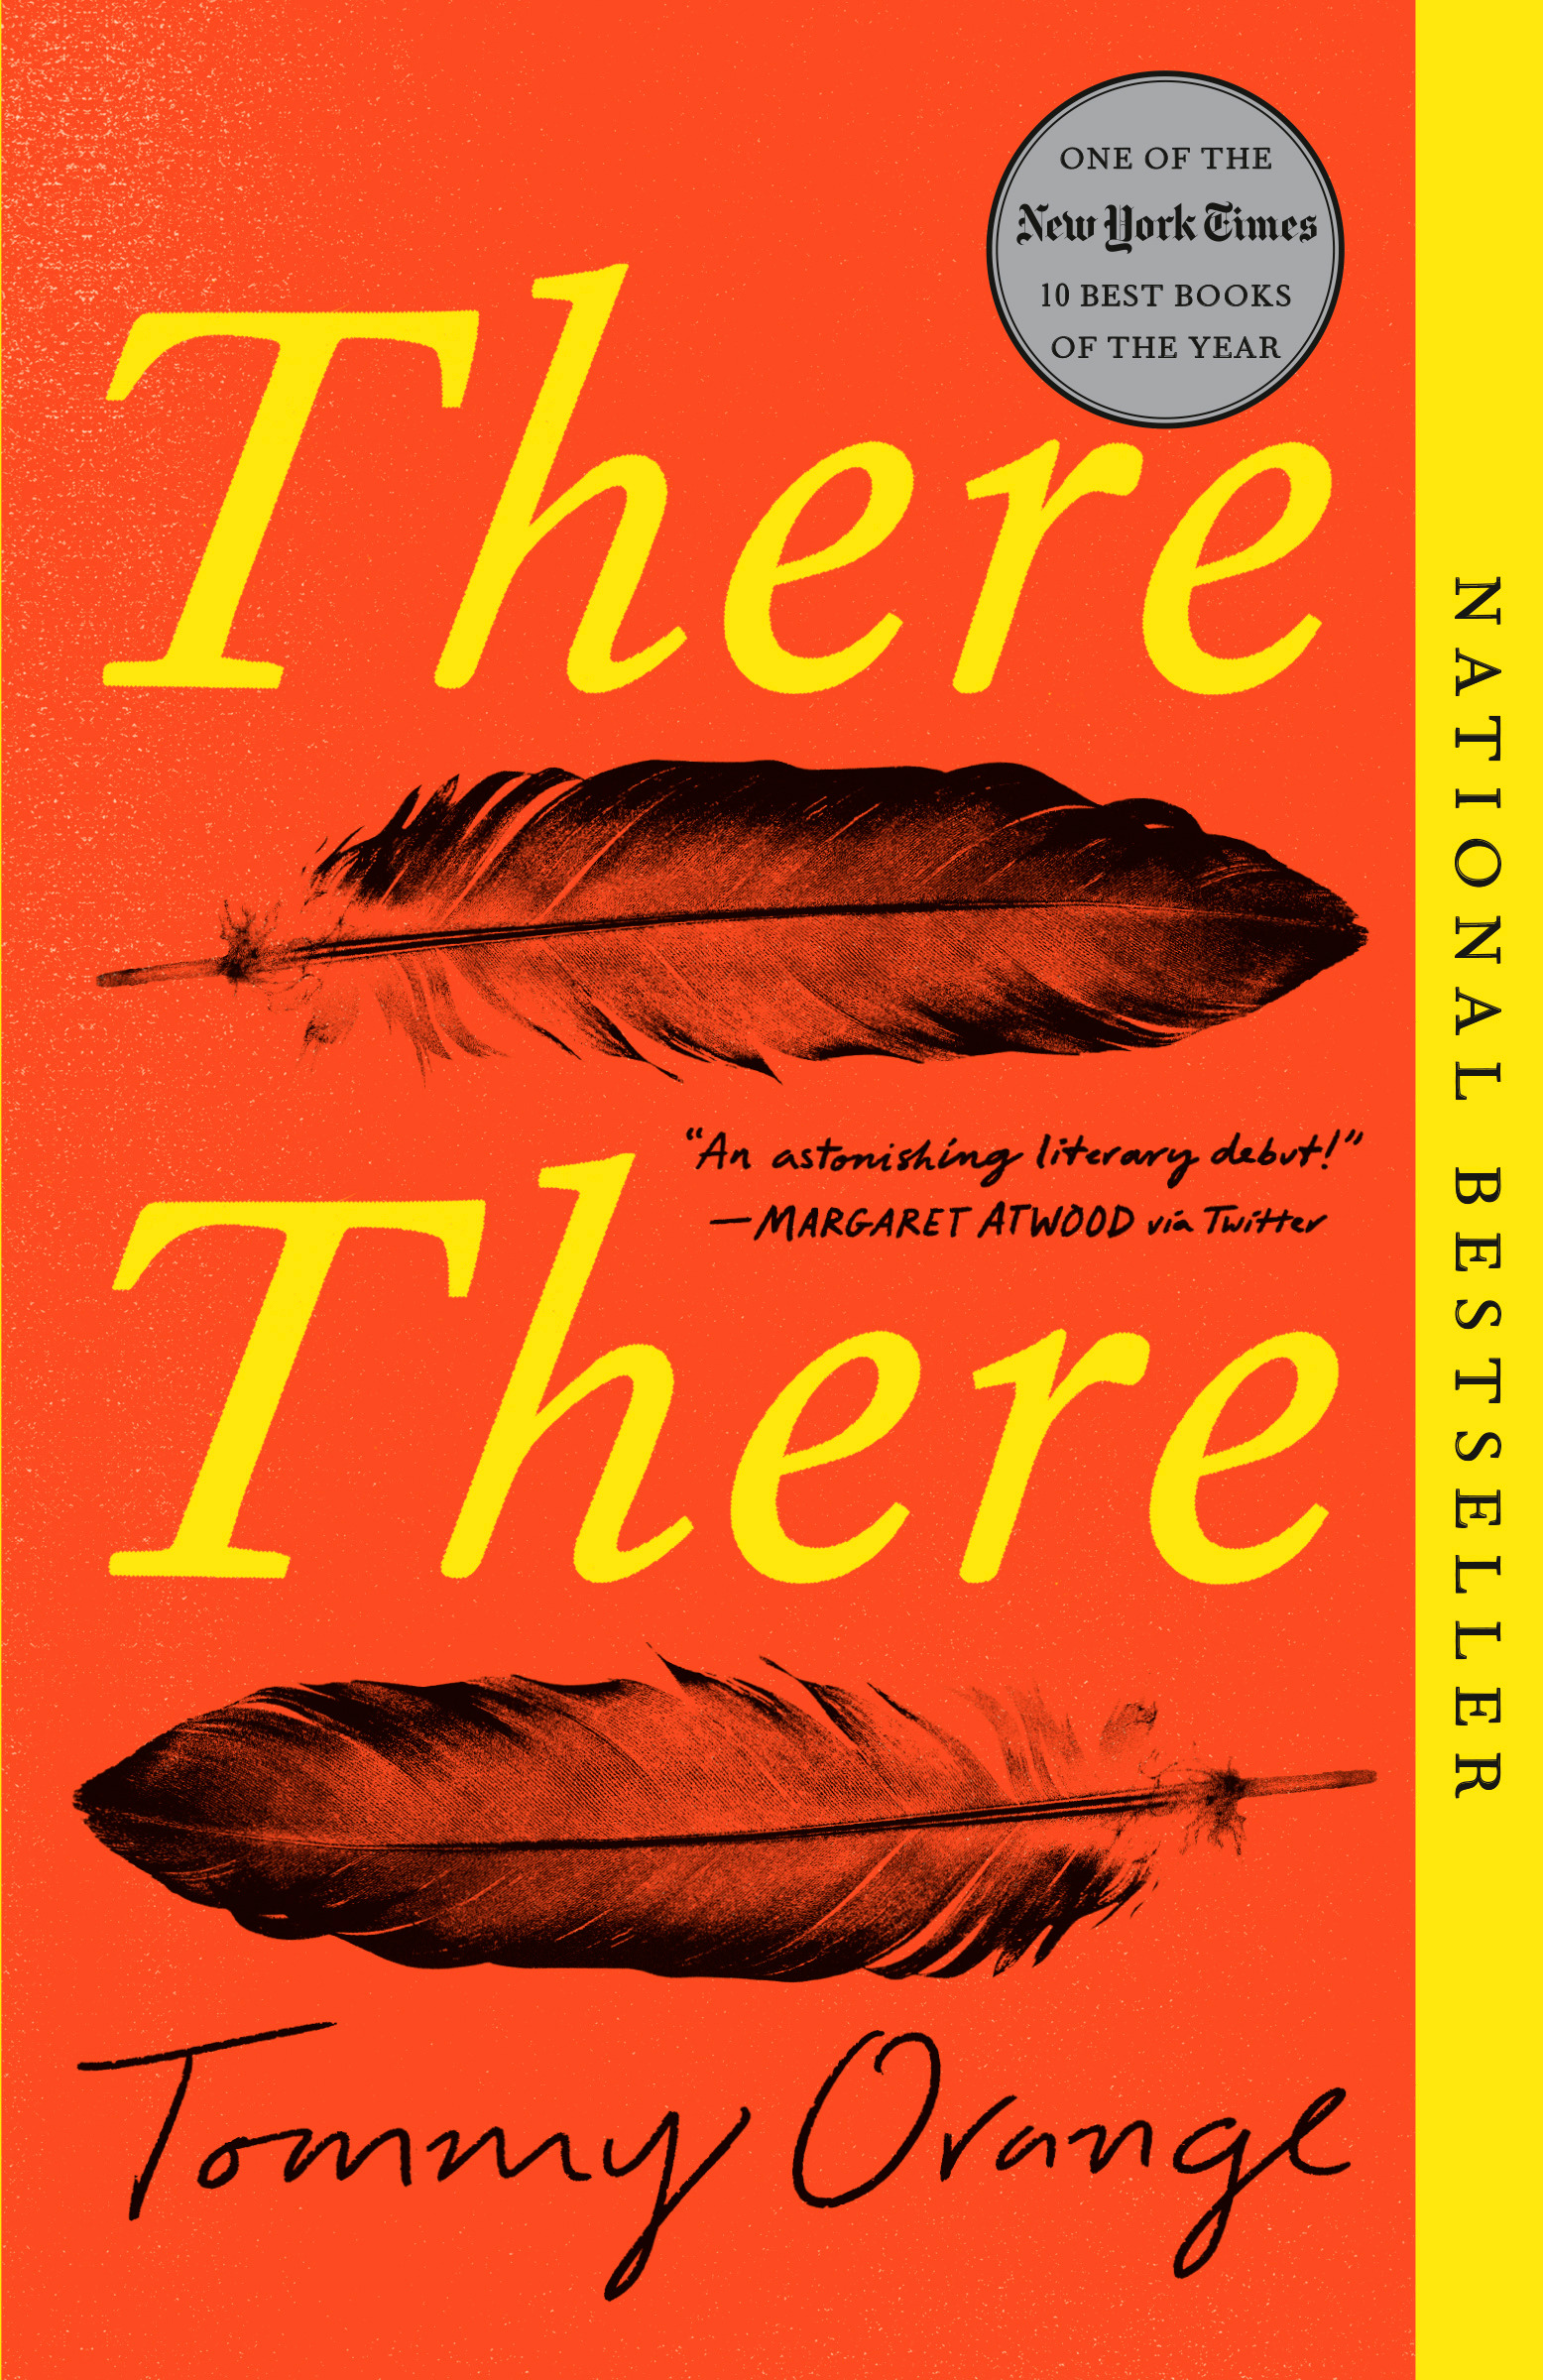 Cover of the book "There There" by Tommy Orange.